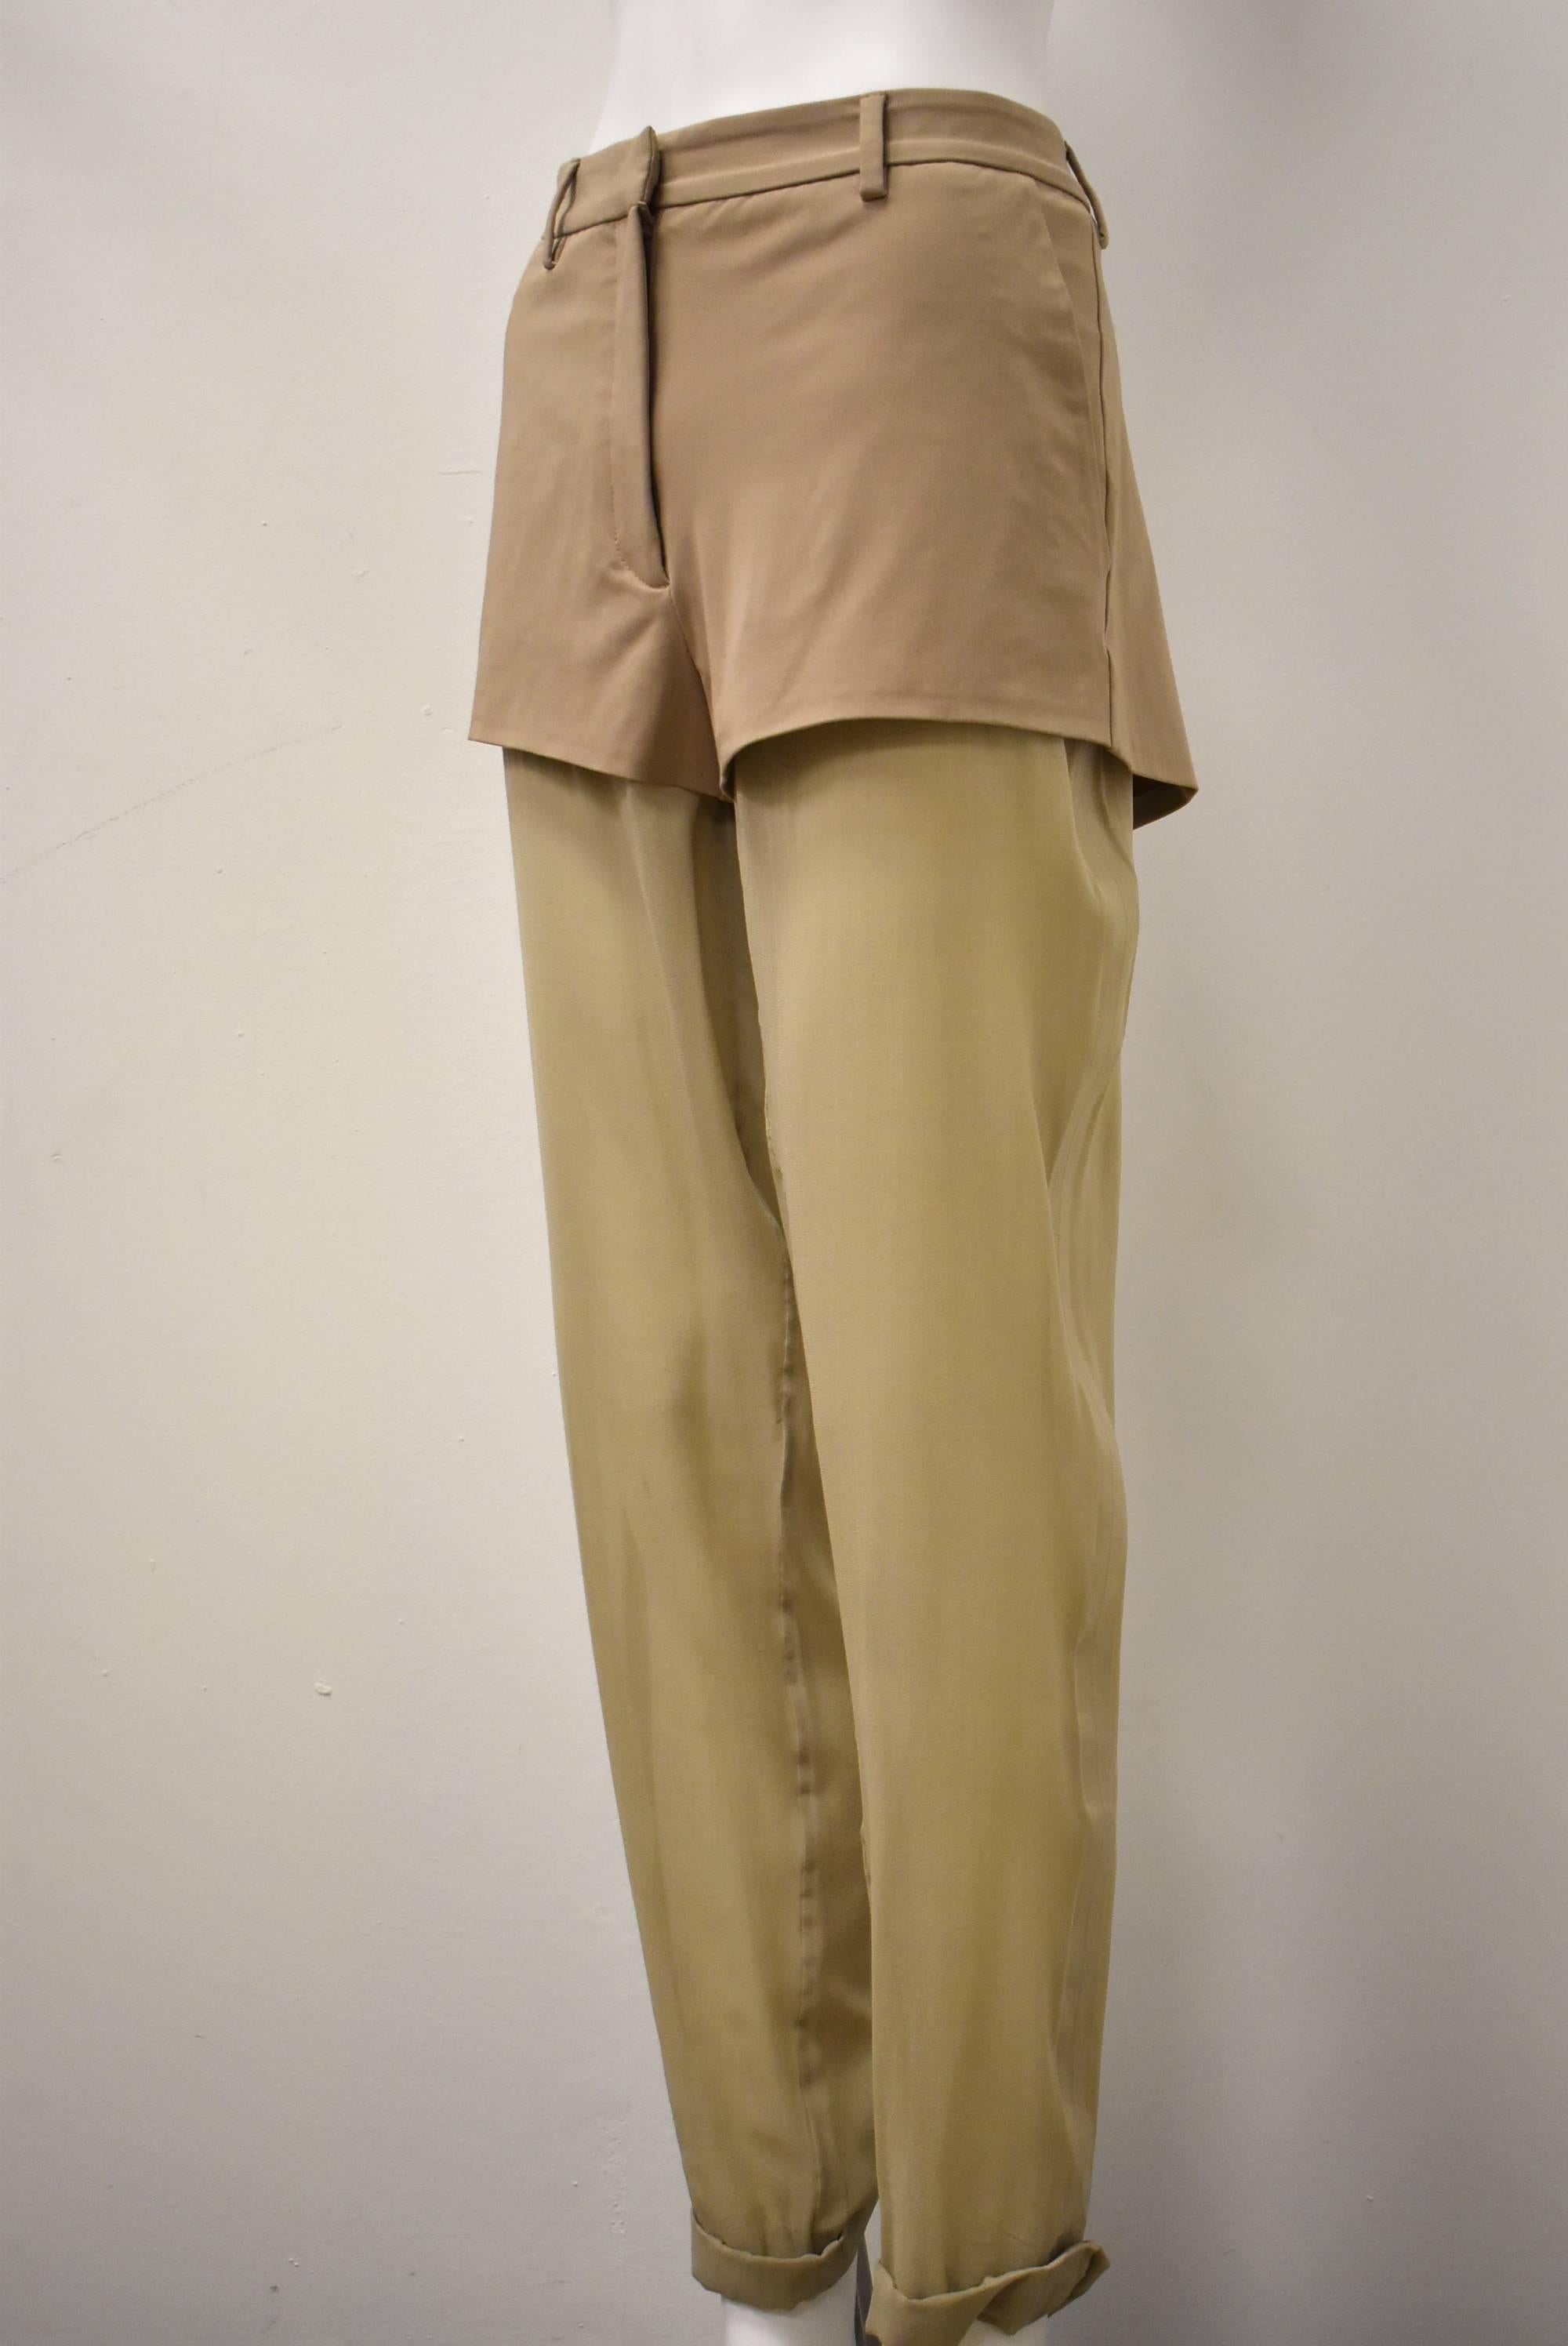 A pair of unusual and unique shorts/ trousers from Maison Martin Margiela Line 1. The shorts are a camel/beige colour with attached sheer trousers in a similar beige tone. The sheer trousers reveal the legs beneath in a subtle way, creating a